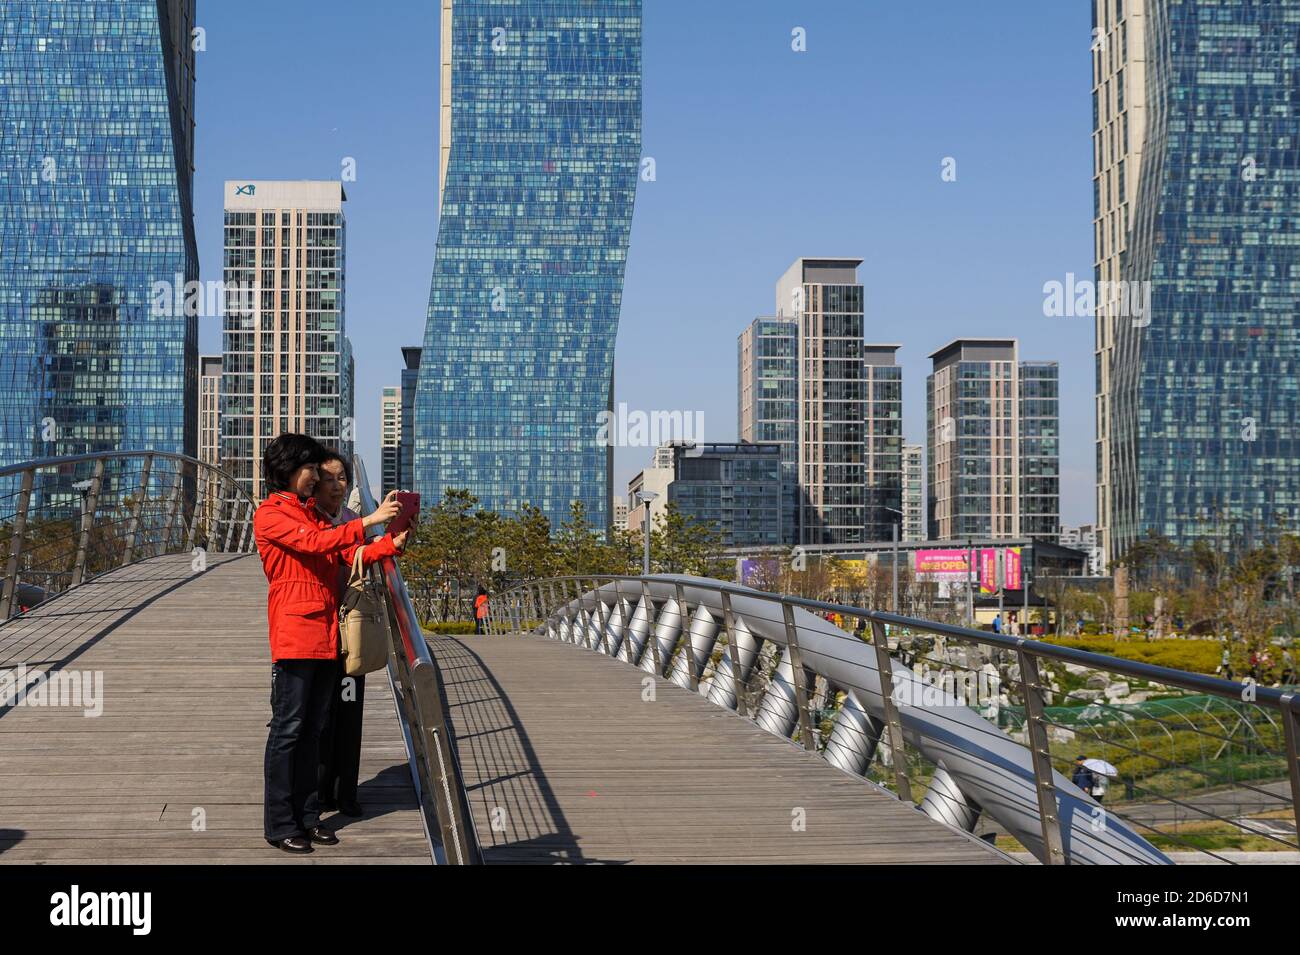 01.05.2013, Seoul, Incheon, South Korea - People on a bridge in front of the New Songdo City in Central Park and the international business district w Stock Photo